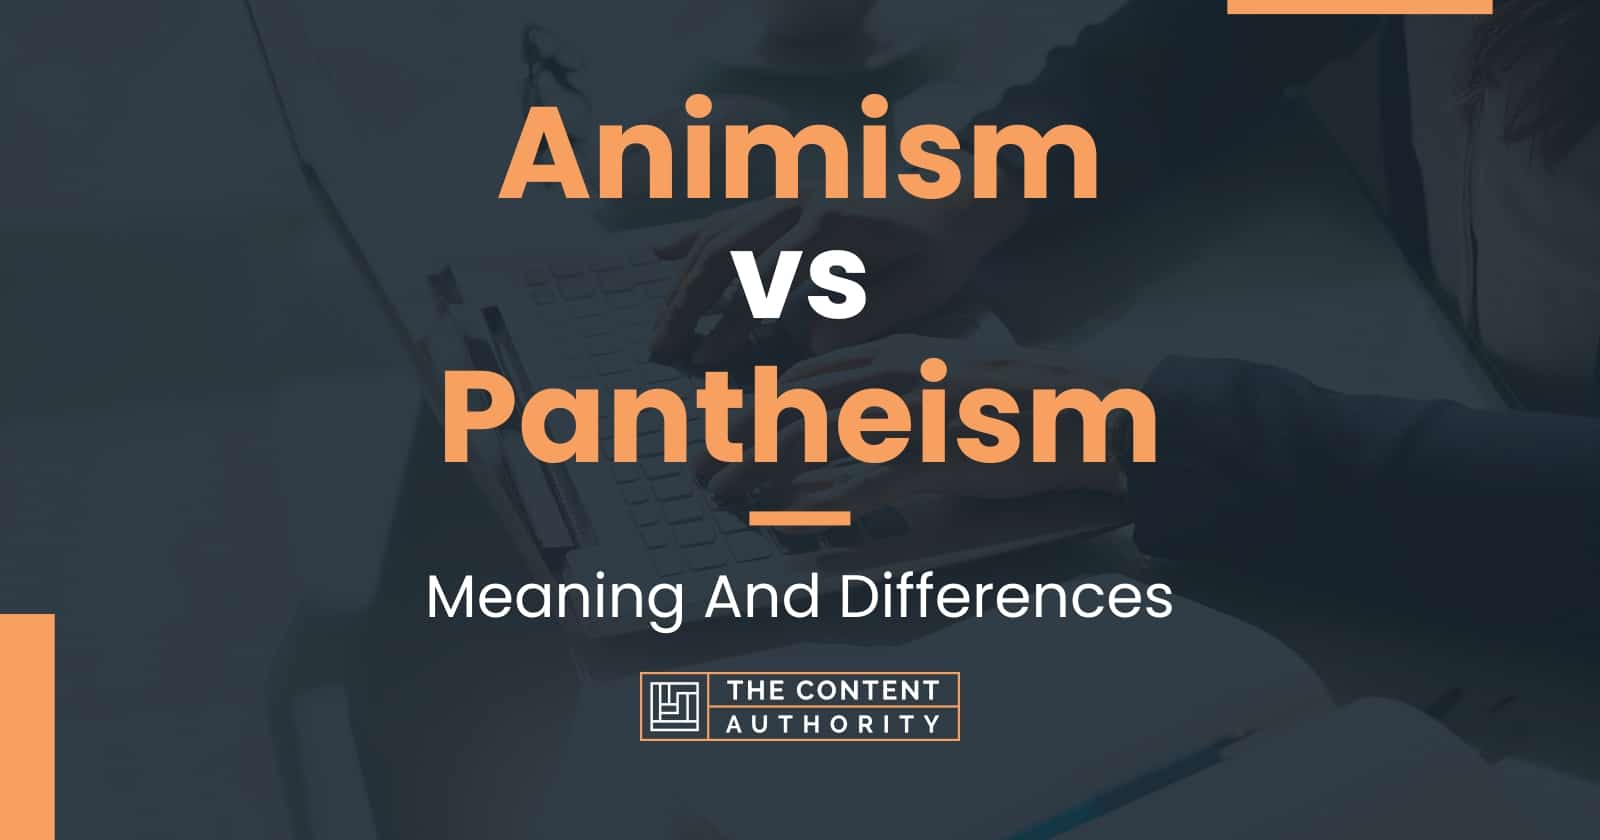 Animism vs Pantheism: Meaning And Differences